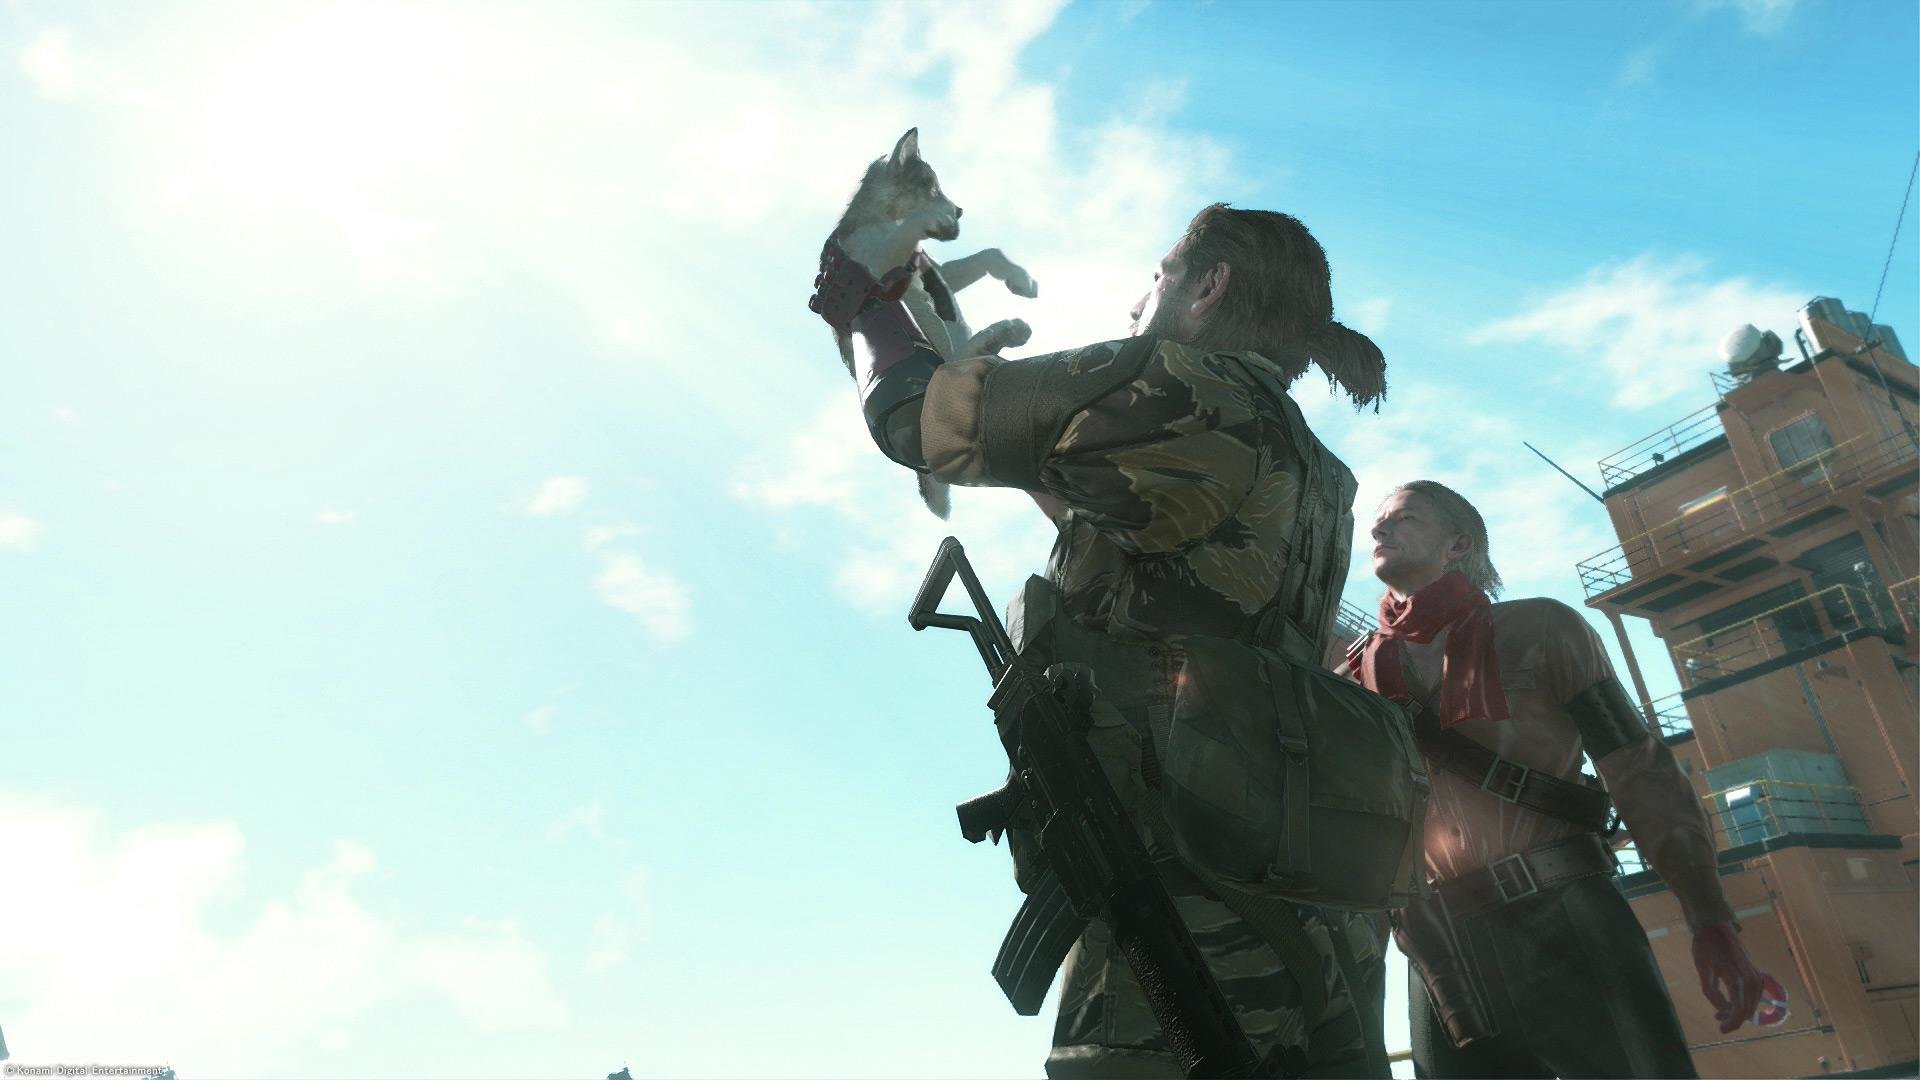 metal gear solid 5 download full game free